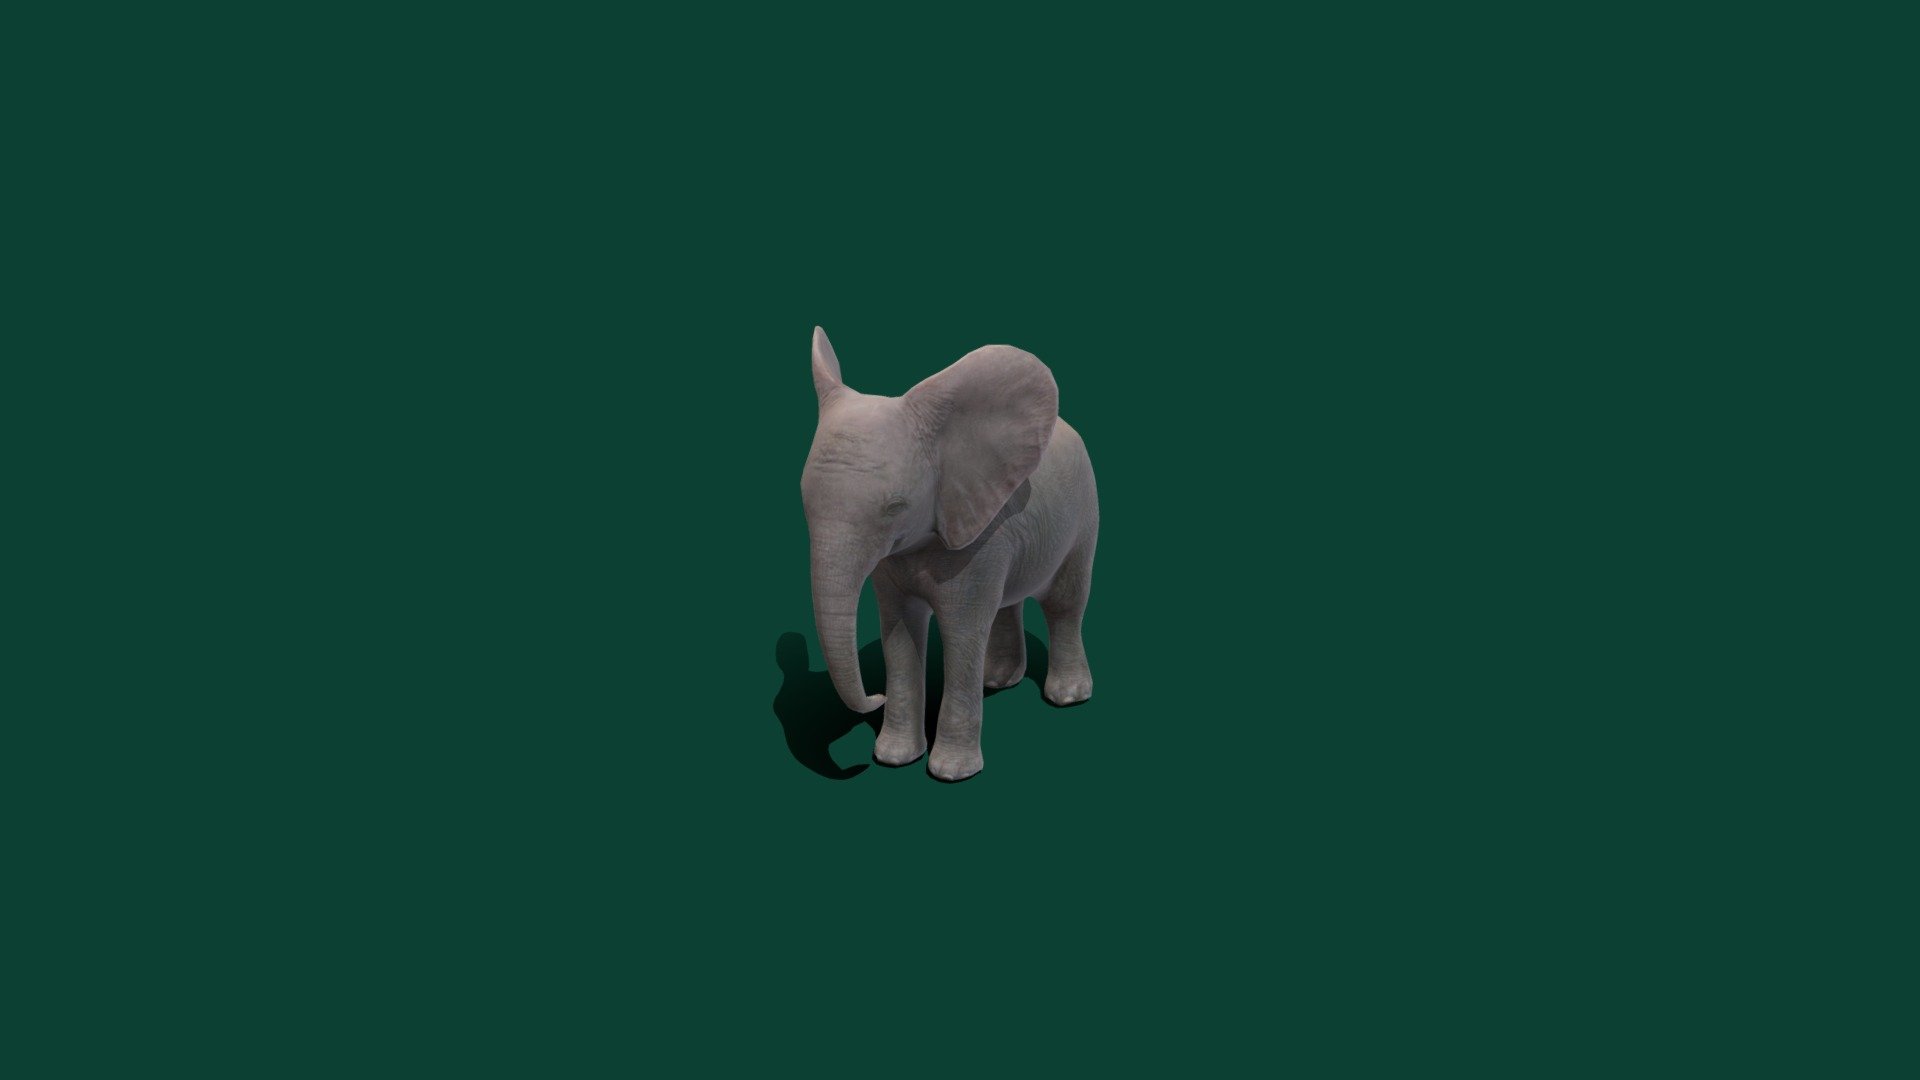 African elephant Cub  ** Loxodonta**
Low_poly
Animated Attack 
Rigged
African elephants are a genus comprising two living elephant species, the African bush elephant and the smaller African forest elephant.
2K Textures
africa_baby_elephant_diffuseOriginal.png
africa_baby_elephant_ao.png
africa_baby_elephant_height.png
africa_baby_elephant_metallic.png
africa_baby_elephant_normal.png
 - African Elephant Baby - 3D model by Nyilonelycompany 3d model